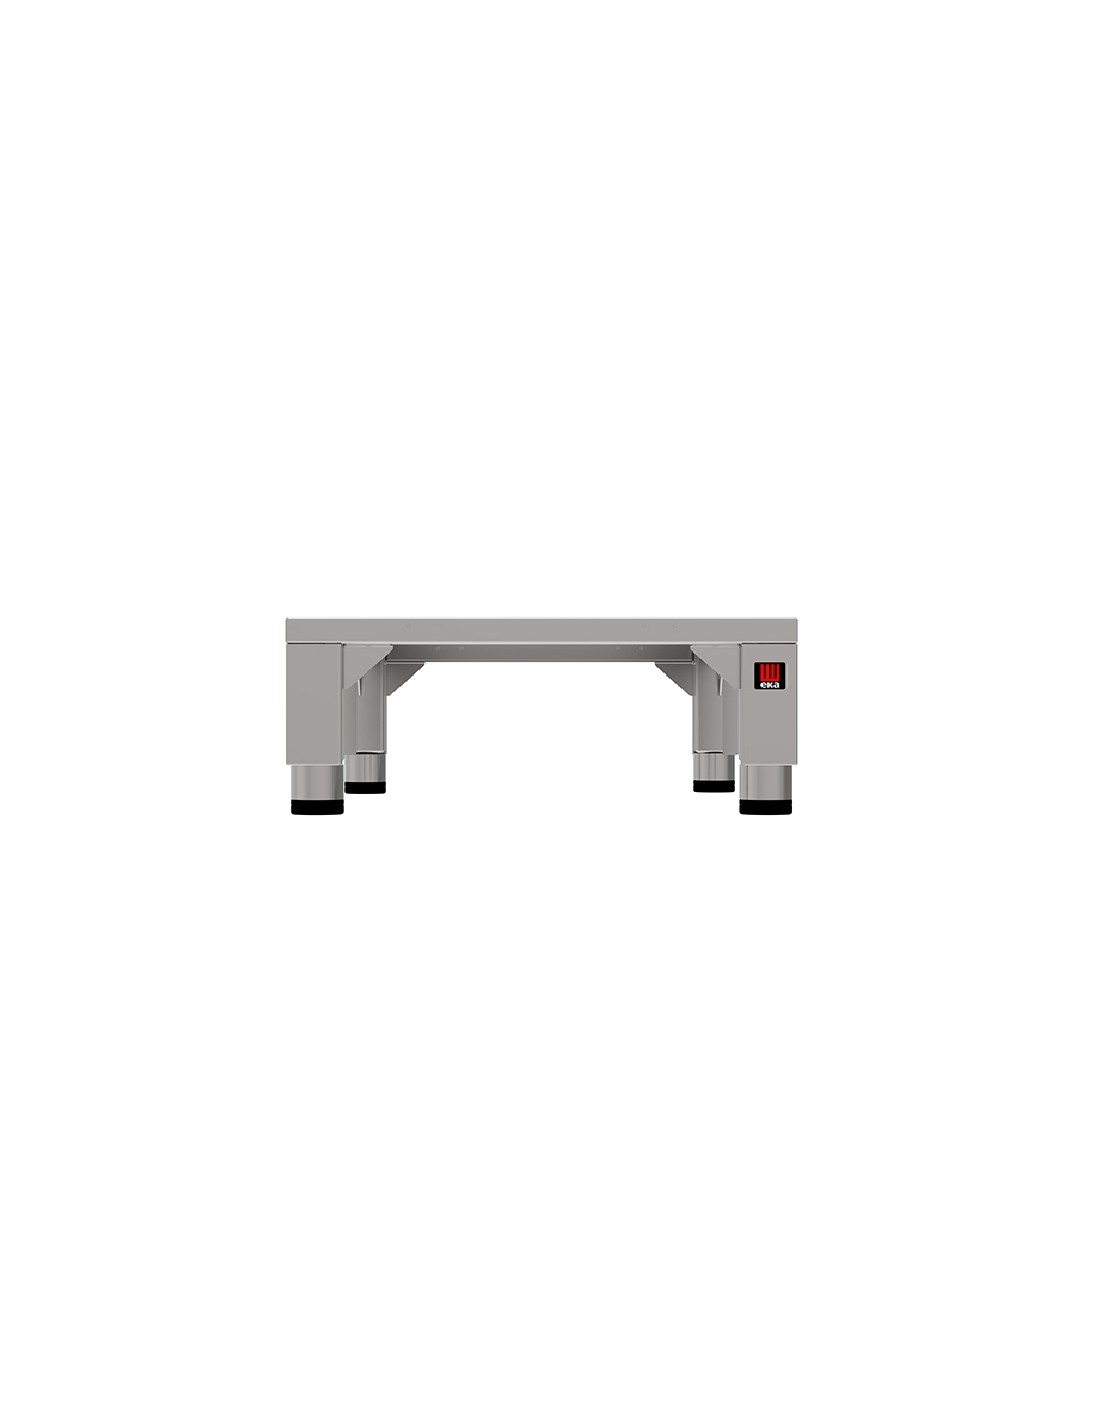 Fixed table - Acciaio inox AISI 430 - For overlapping furnaces - Dimensions cm 50 x 55.6 x22h